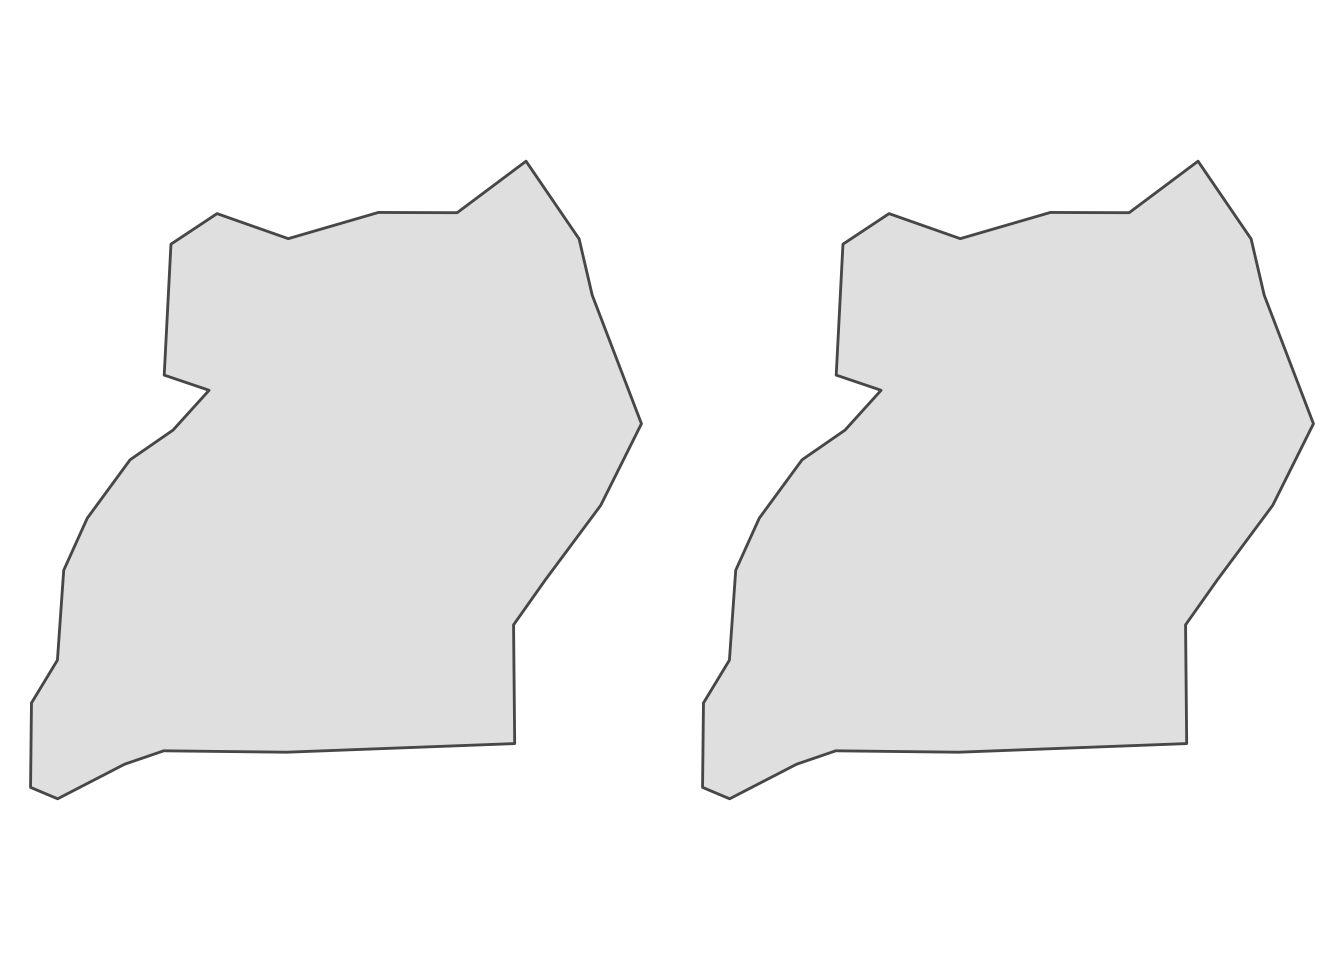 Two identical rough grey outlines of Uganda's border, with the interior shaded in light grey.